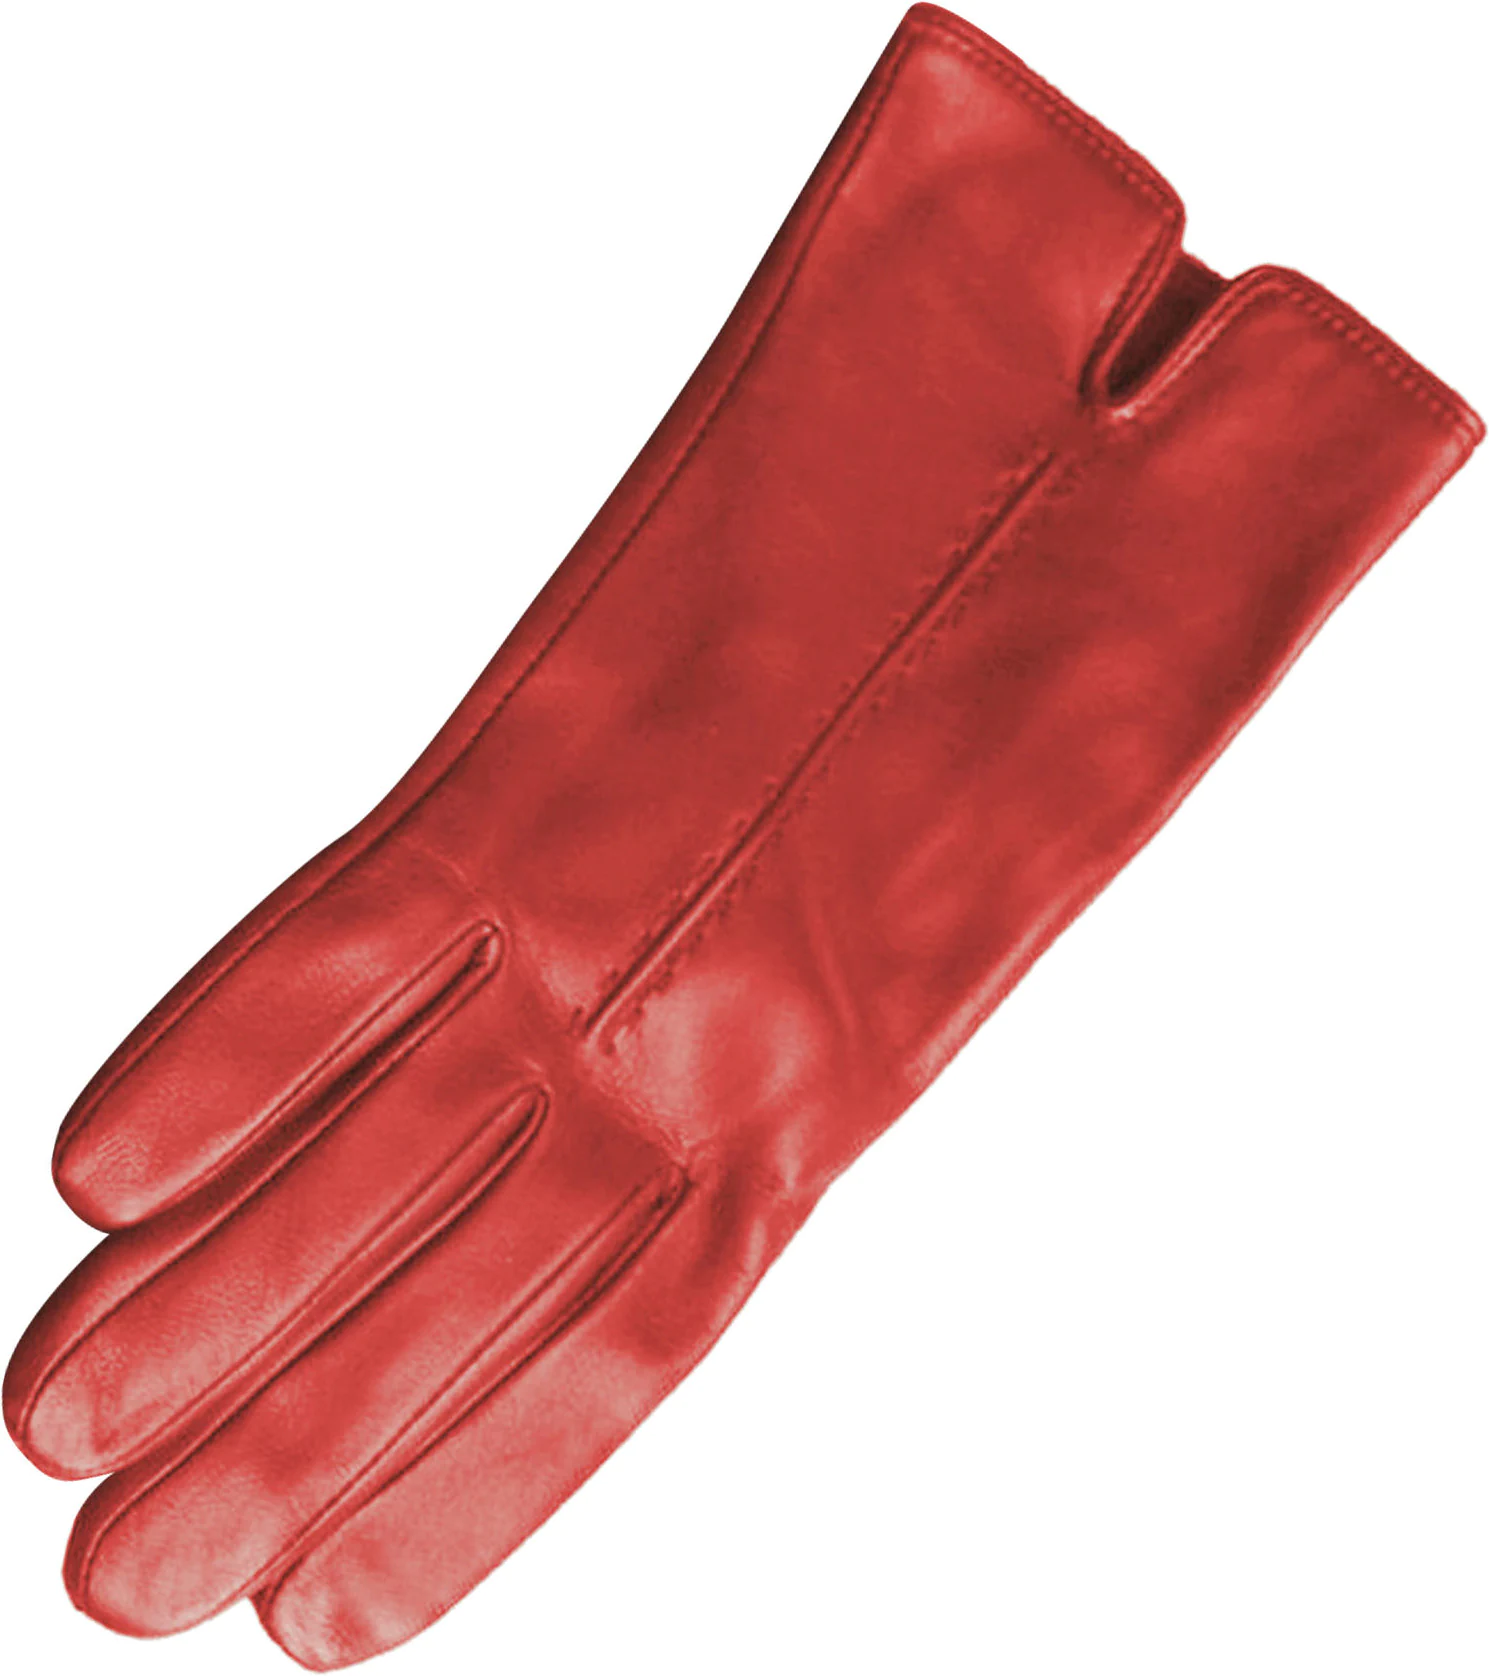 Eastern Counties Leather Tess single point seam gloves